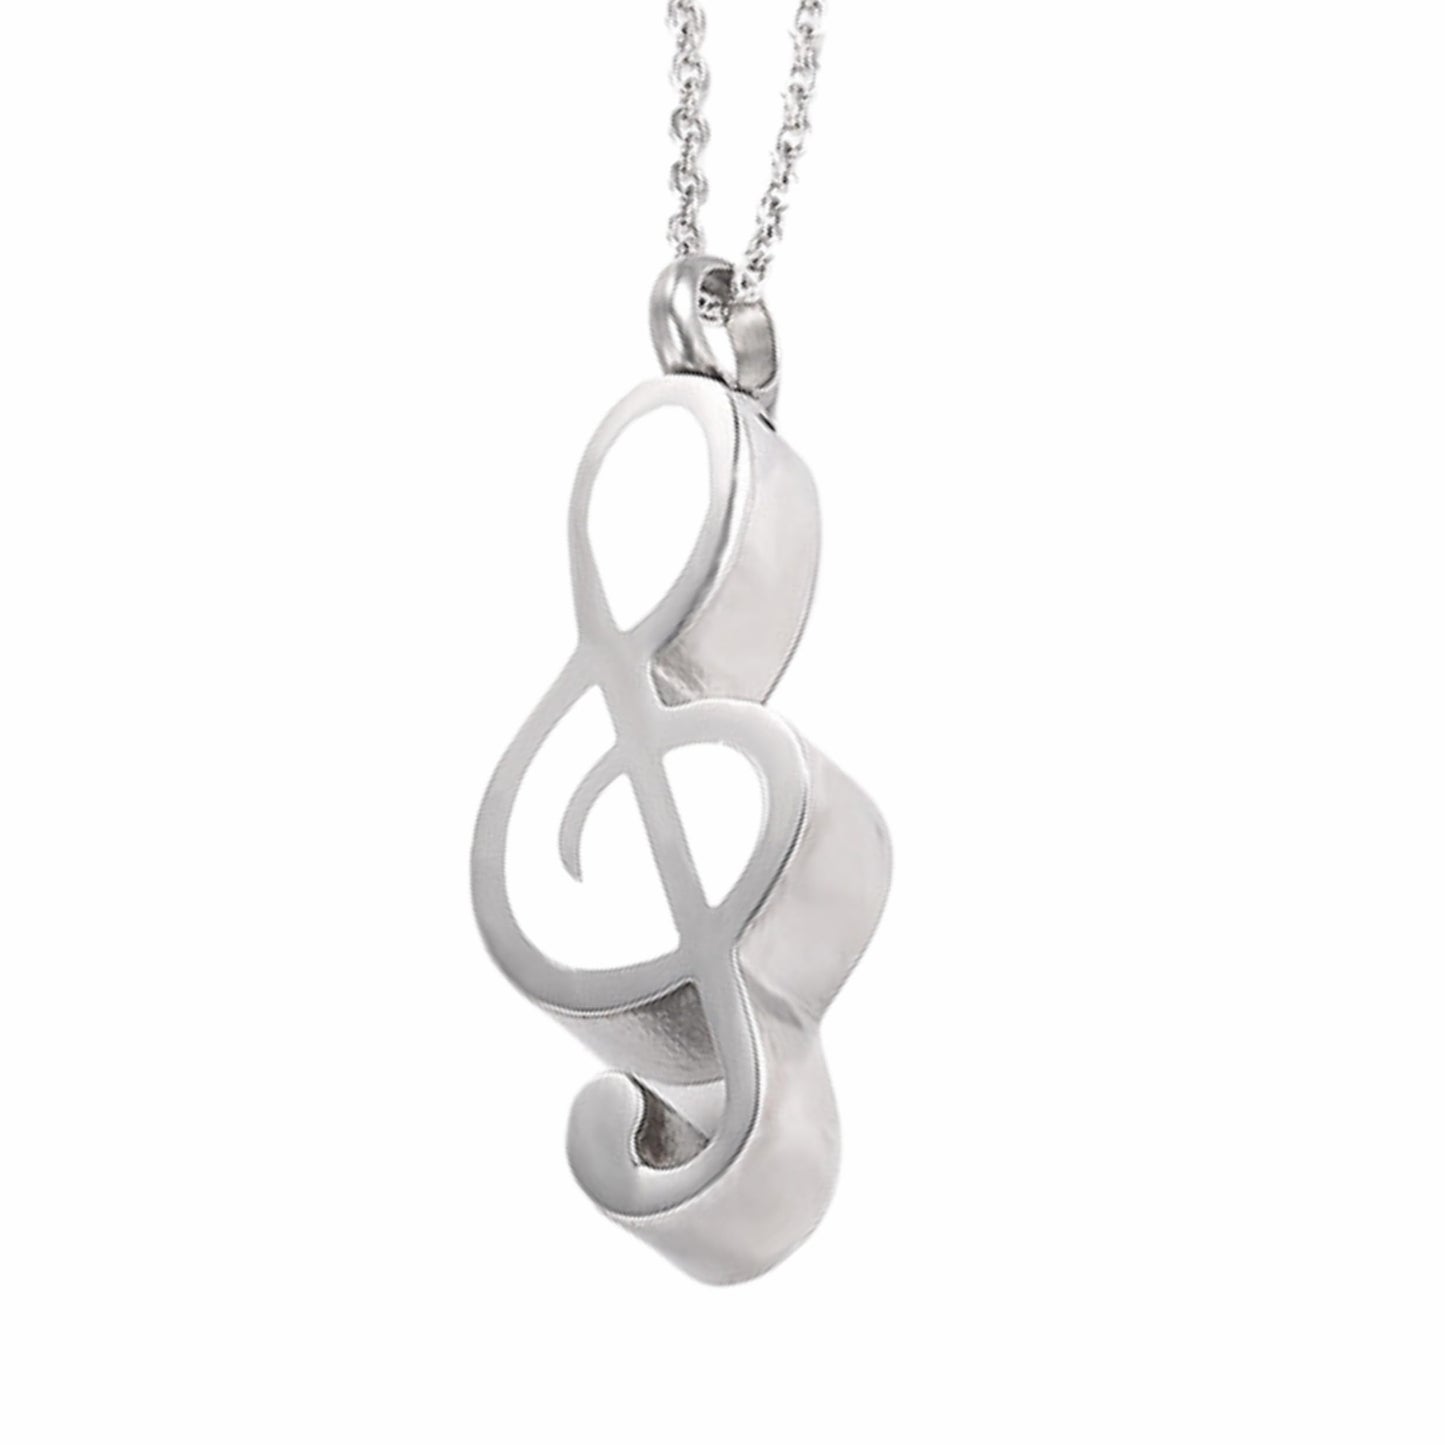 Music Note URN Necklace, Stainless Steel Cremation Memorial Keepsake Pendant Jewelry for Ashes (Funnel & Pin included) (Silver + White, 1)